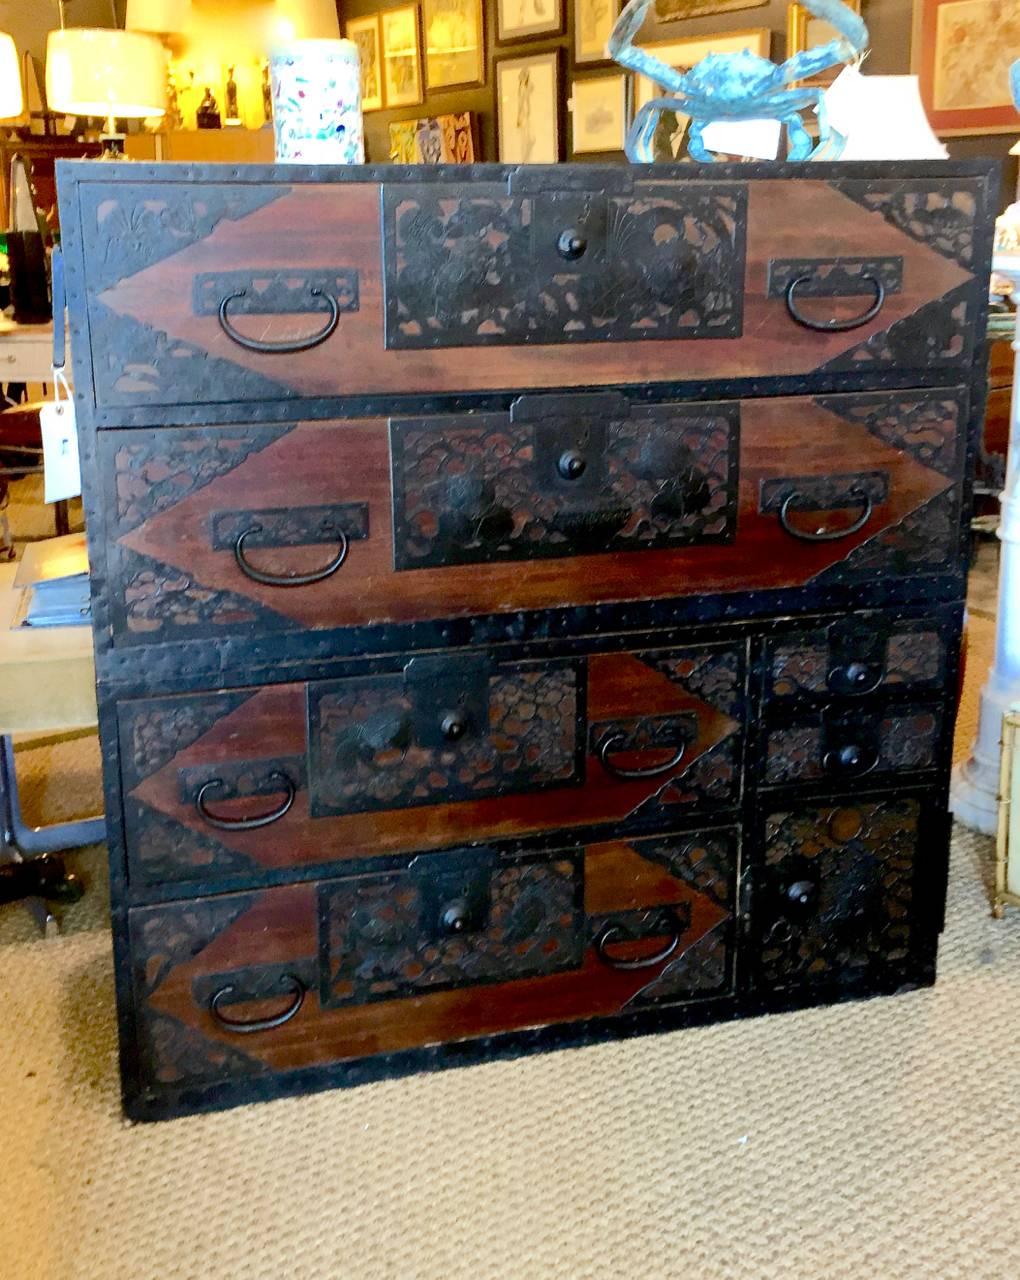 This is a stunning late Meiji Period (circa 1880-1890) Sendai Tansu. This particular tansu is the more desirable two-part form and was used to store Samurai clothing. Sendai Tansu are characterized by beautiful forged and cast iron fittings. The